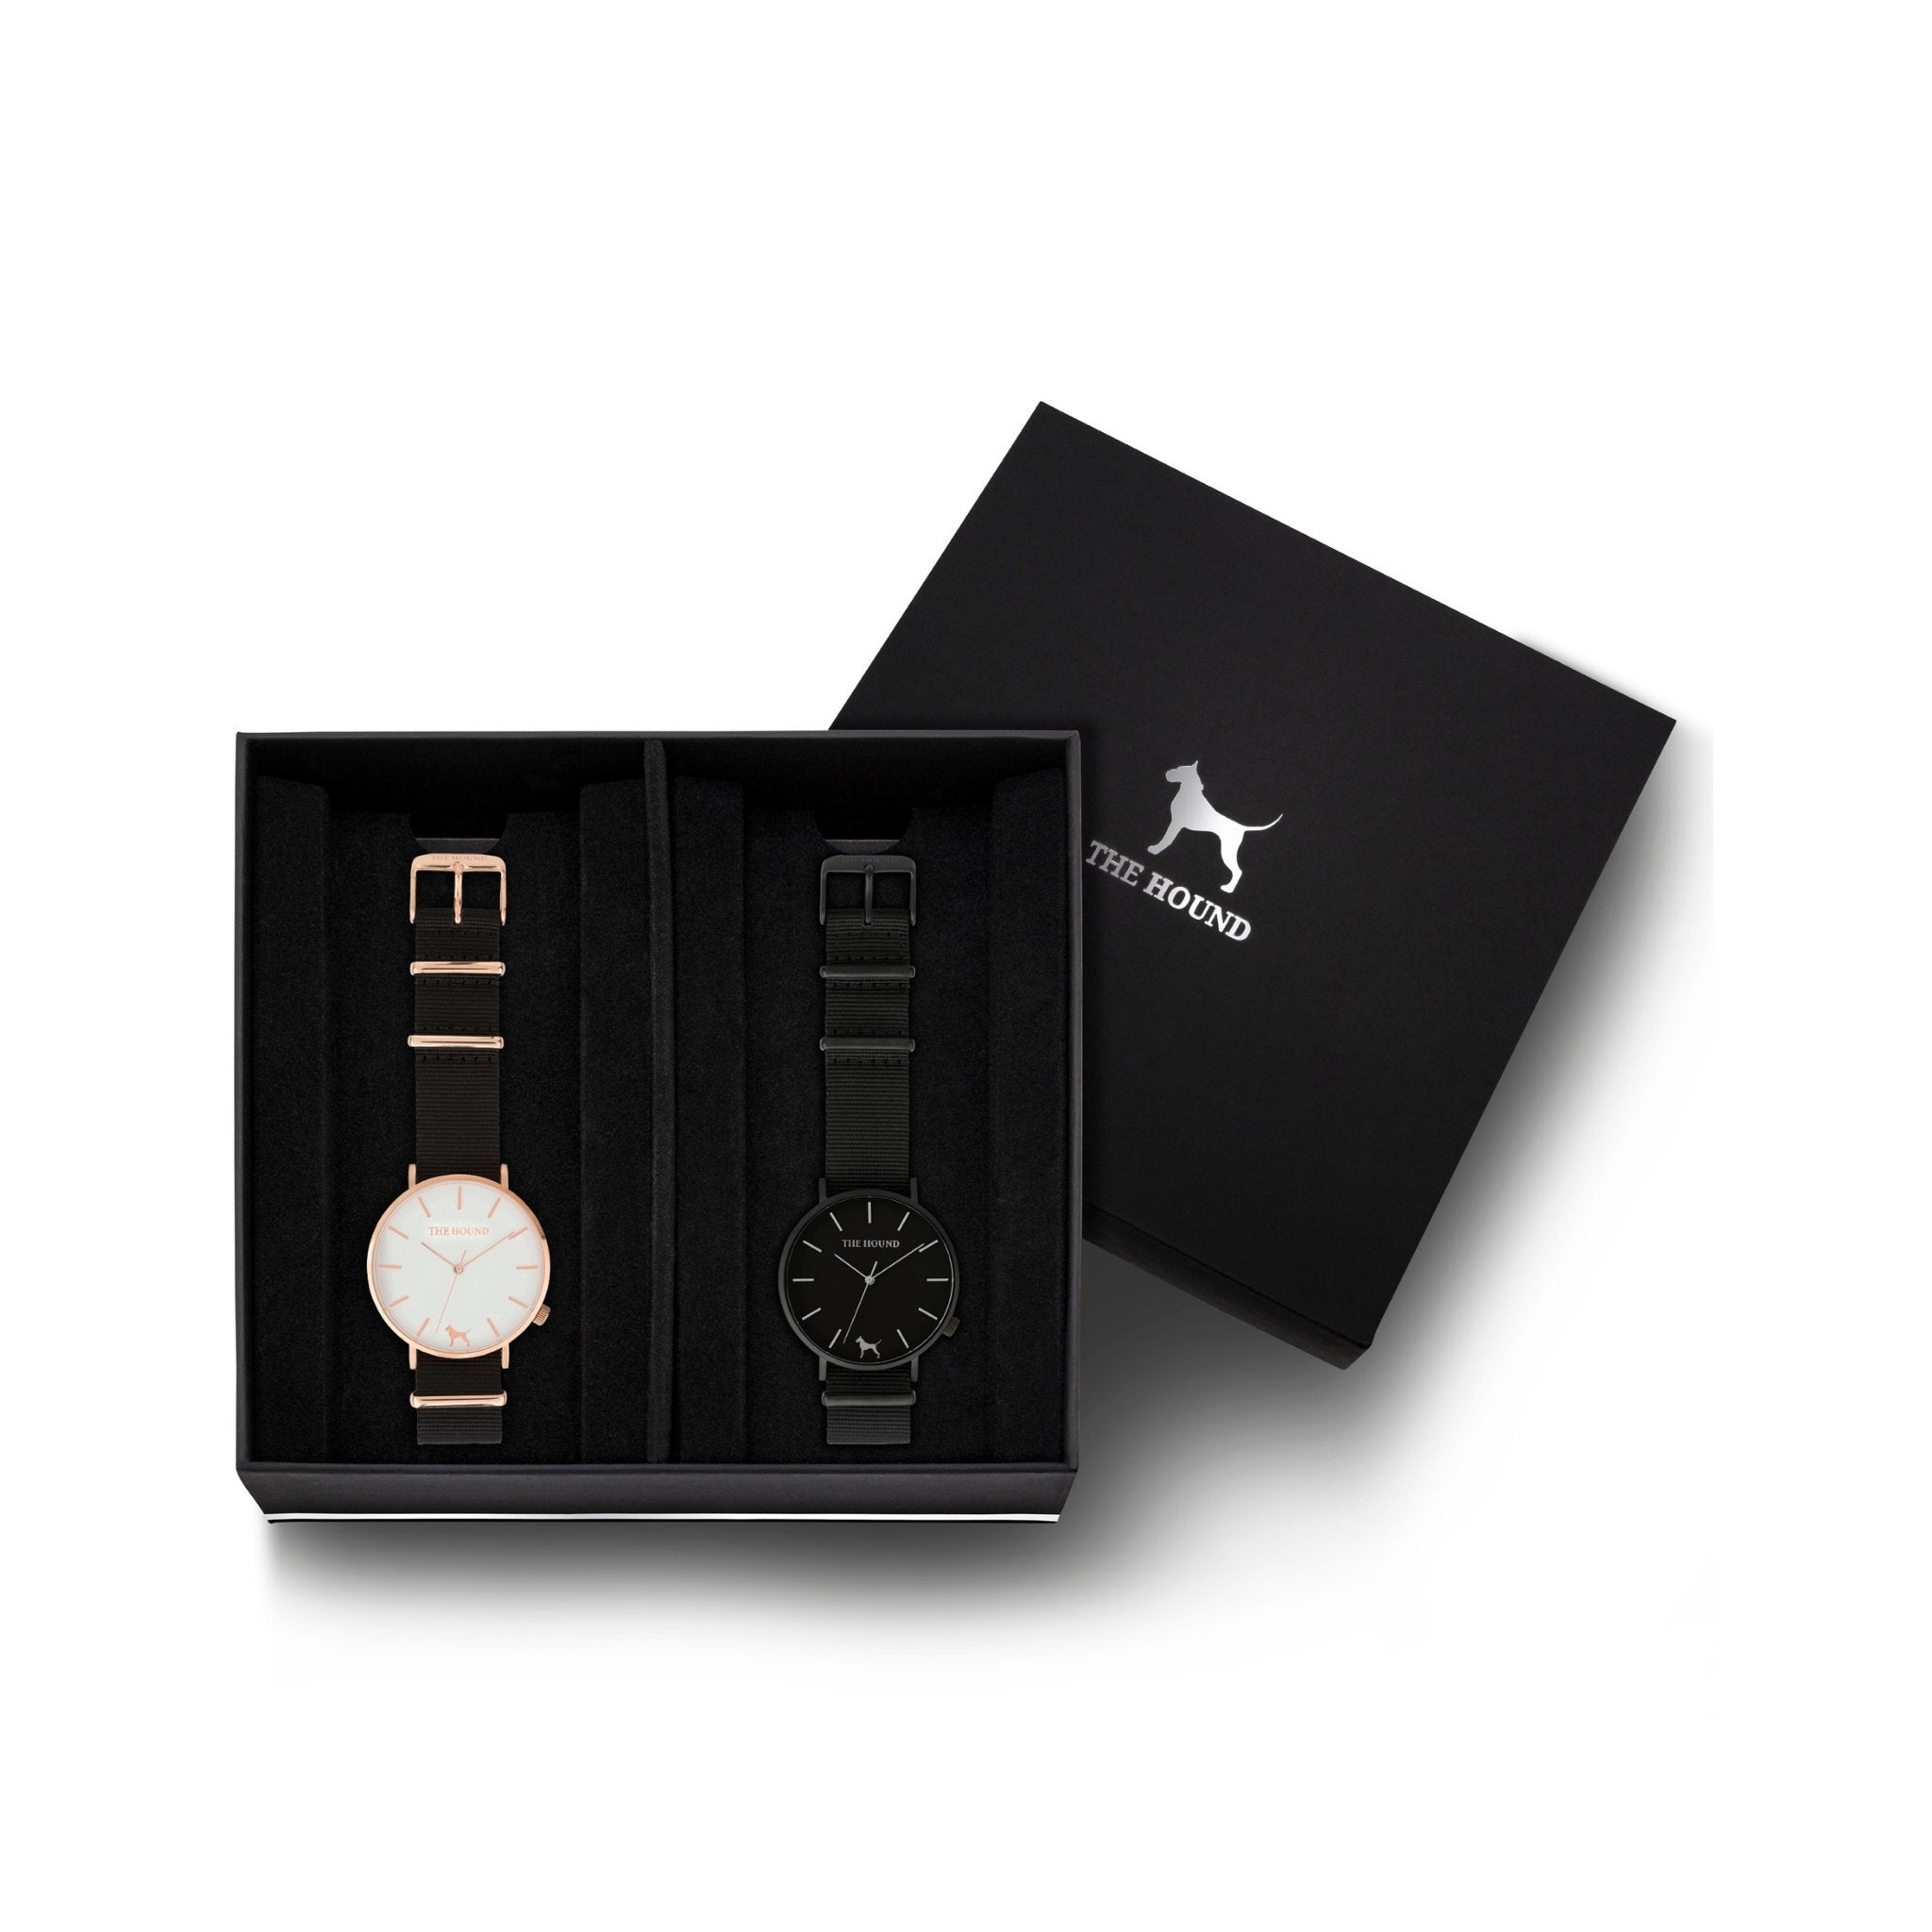 Custom gift set - Rose gold and white watch with black nato band and a matte black and black watch with black nato leather band